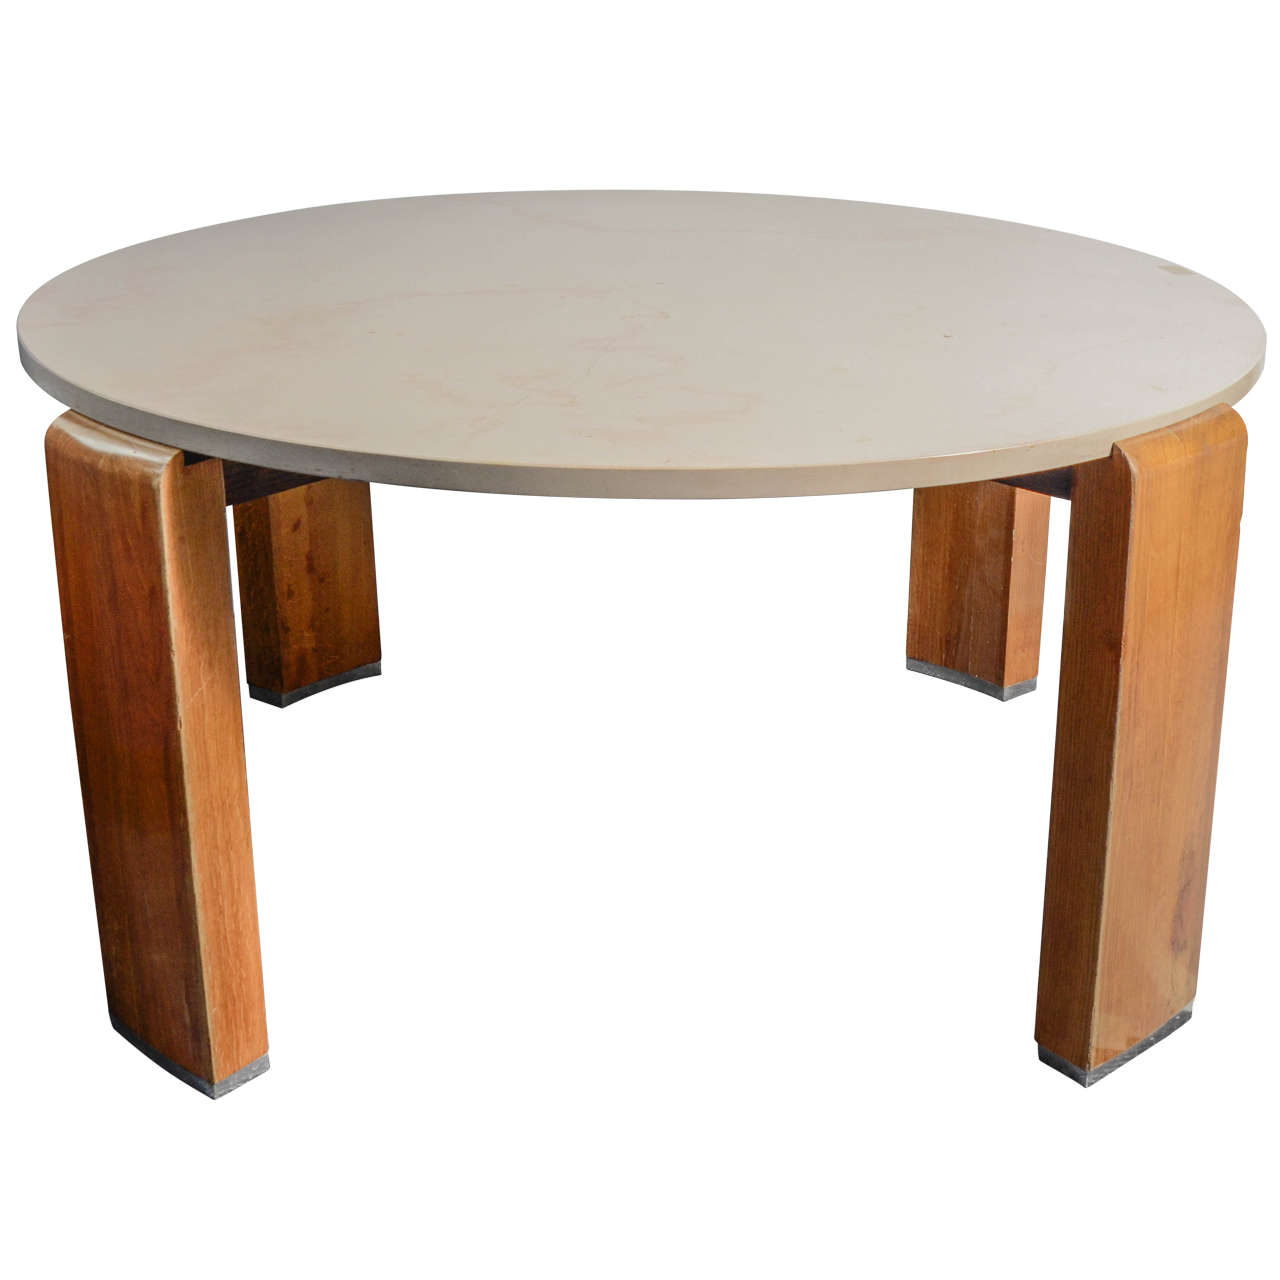 Round Pedestal Table By Jacques Adnet